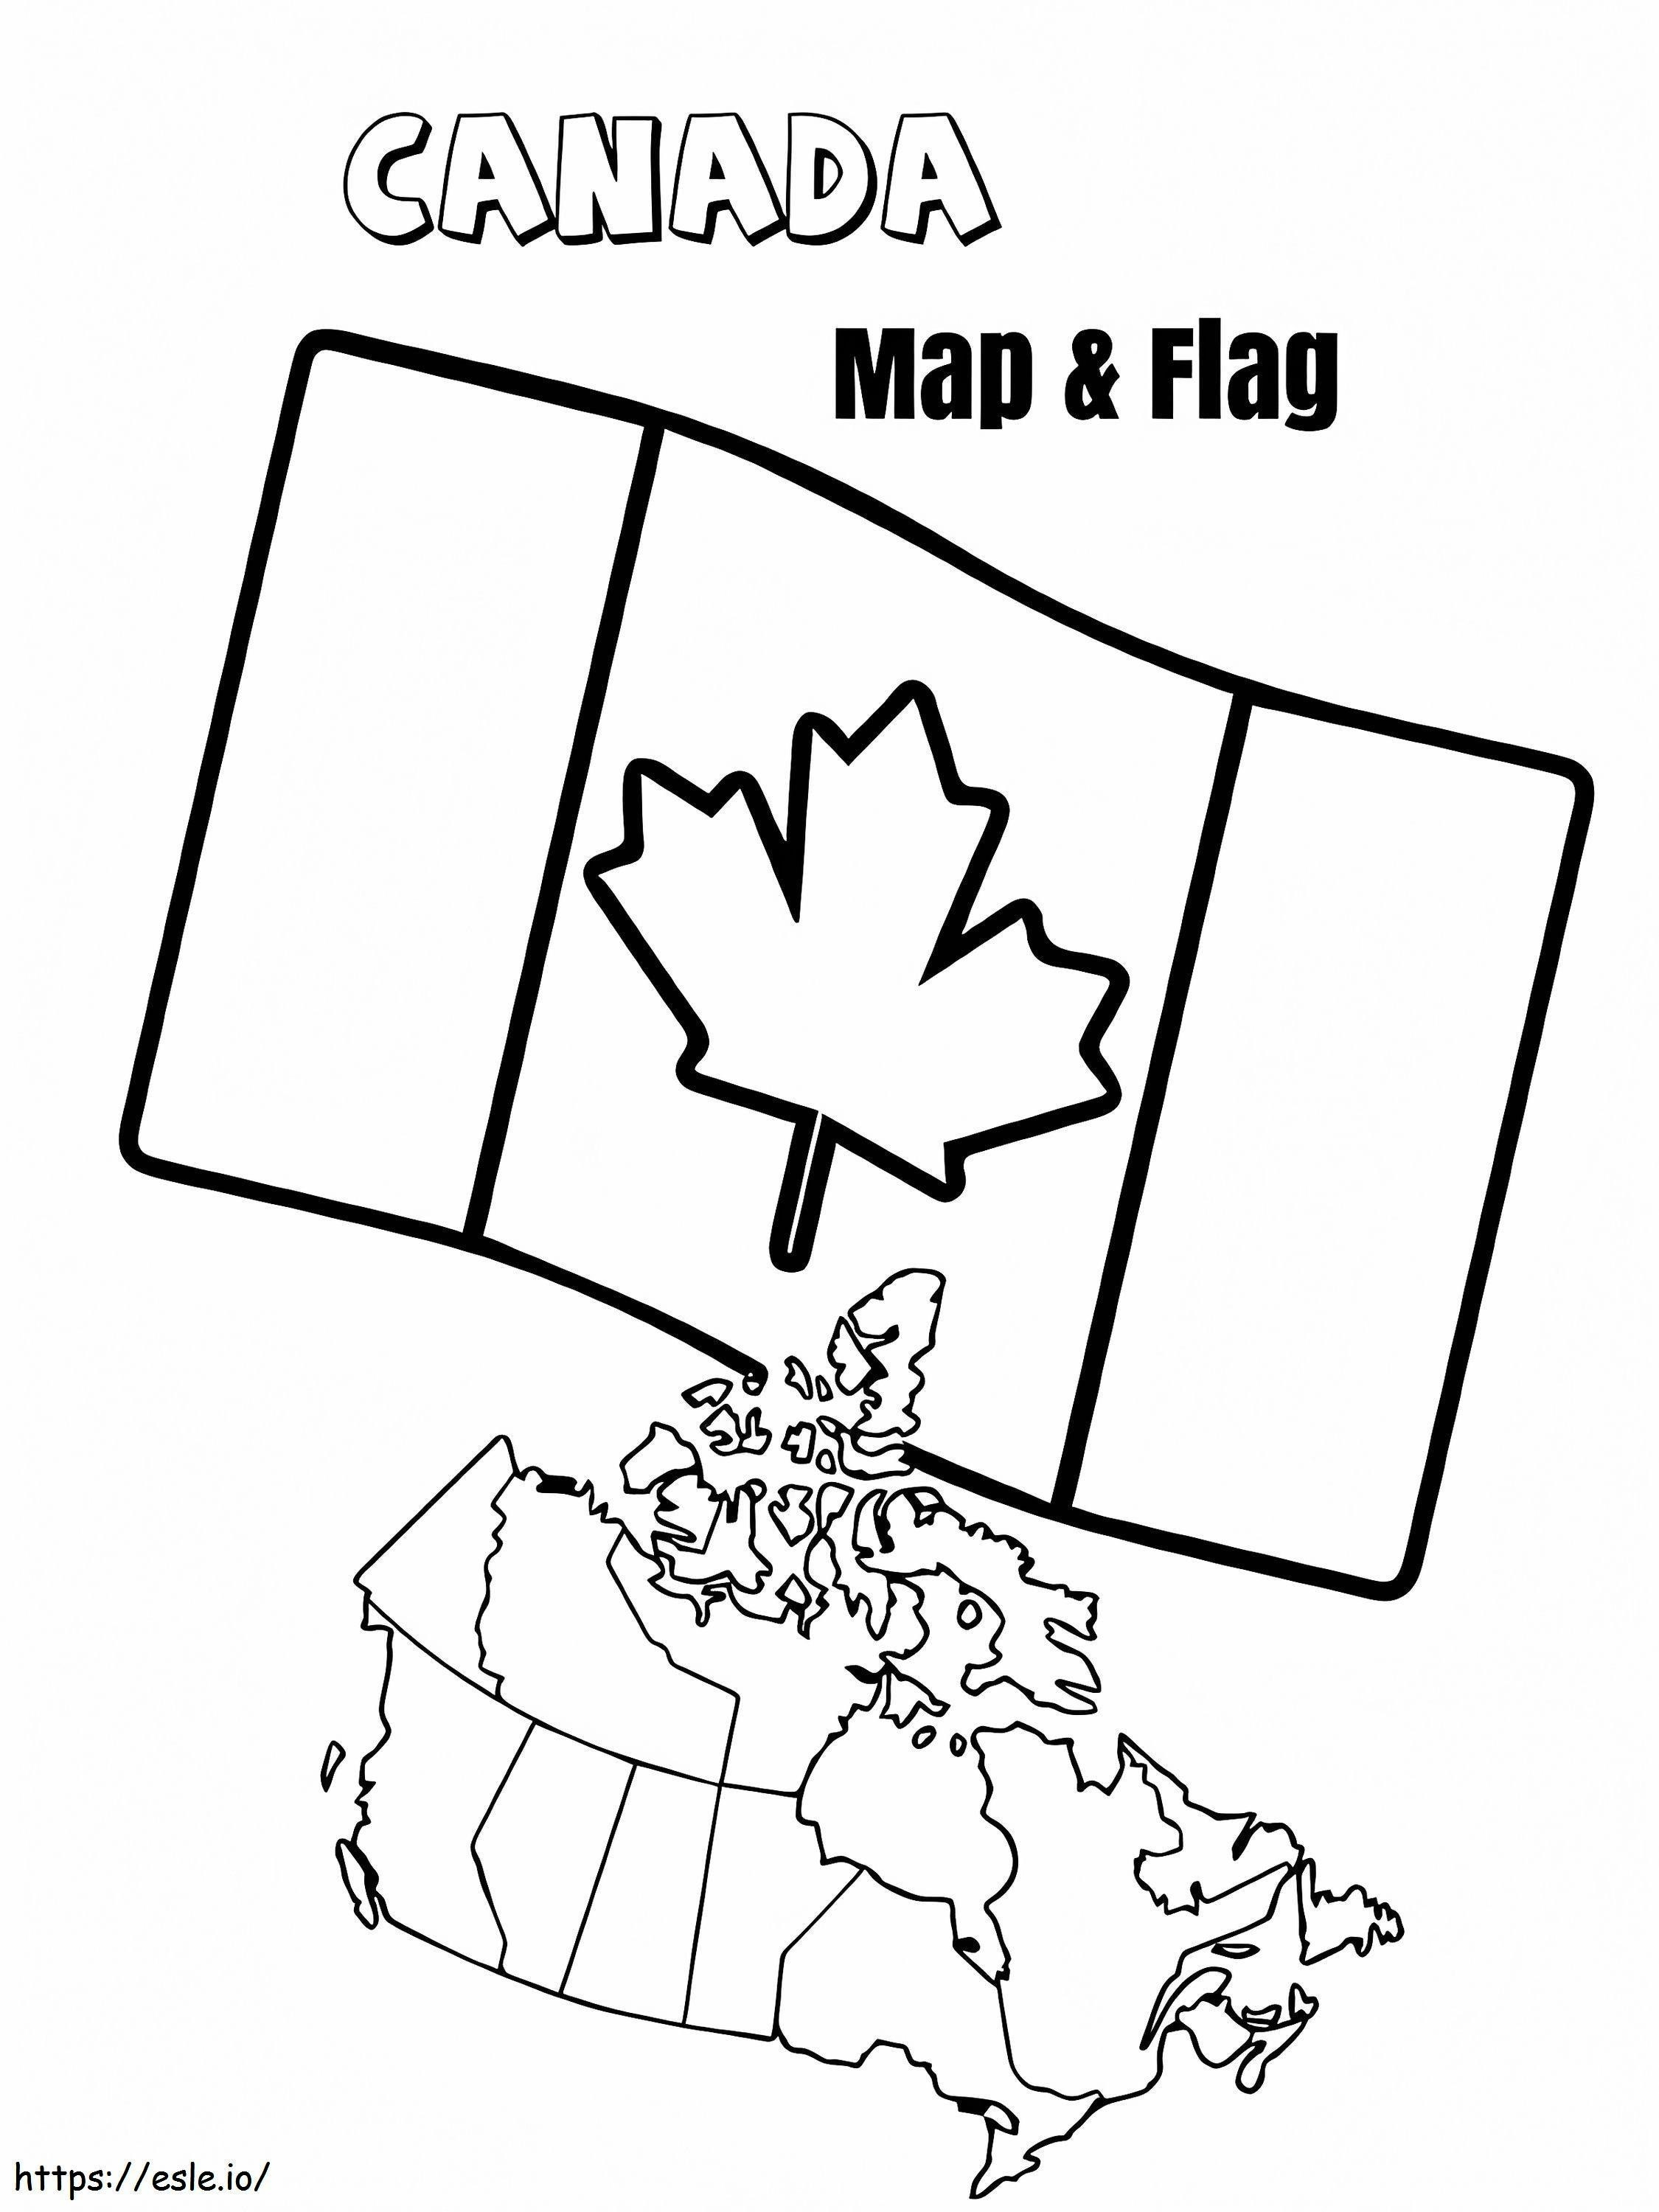 Canada Flag And Map coloring page